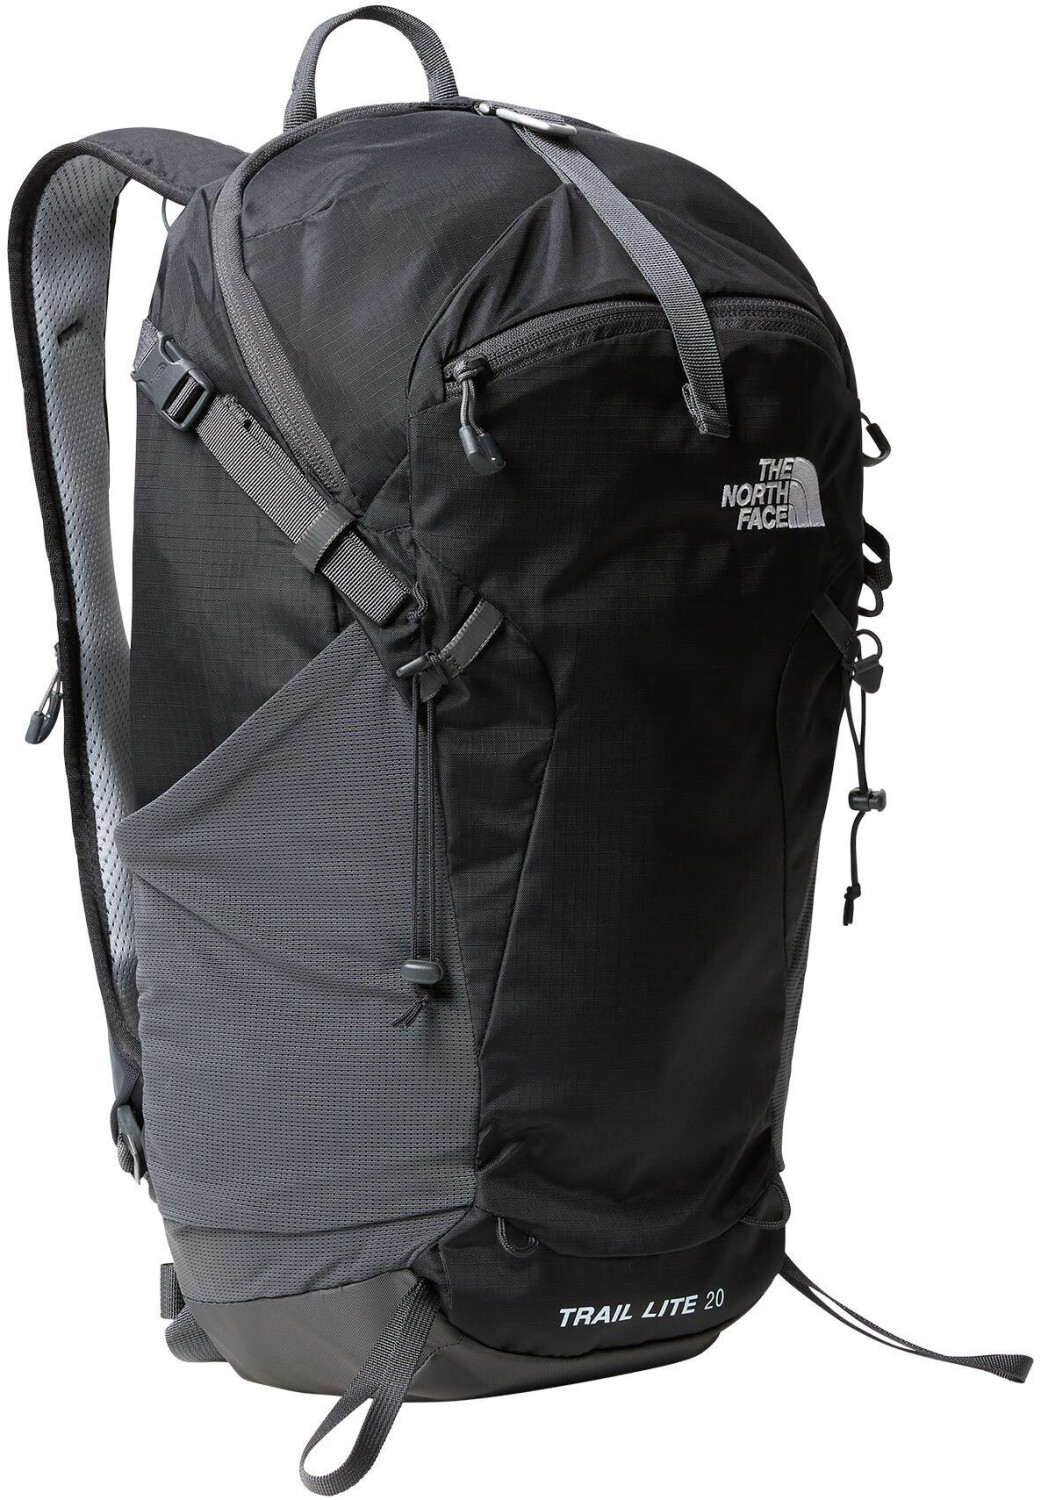 Photos - Backpack The North Face Trail Lite Speed 20L TNF Black/Asphalt Grey 